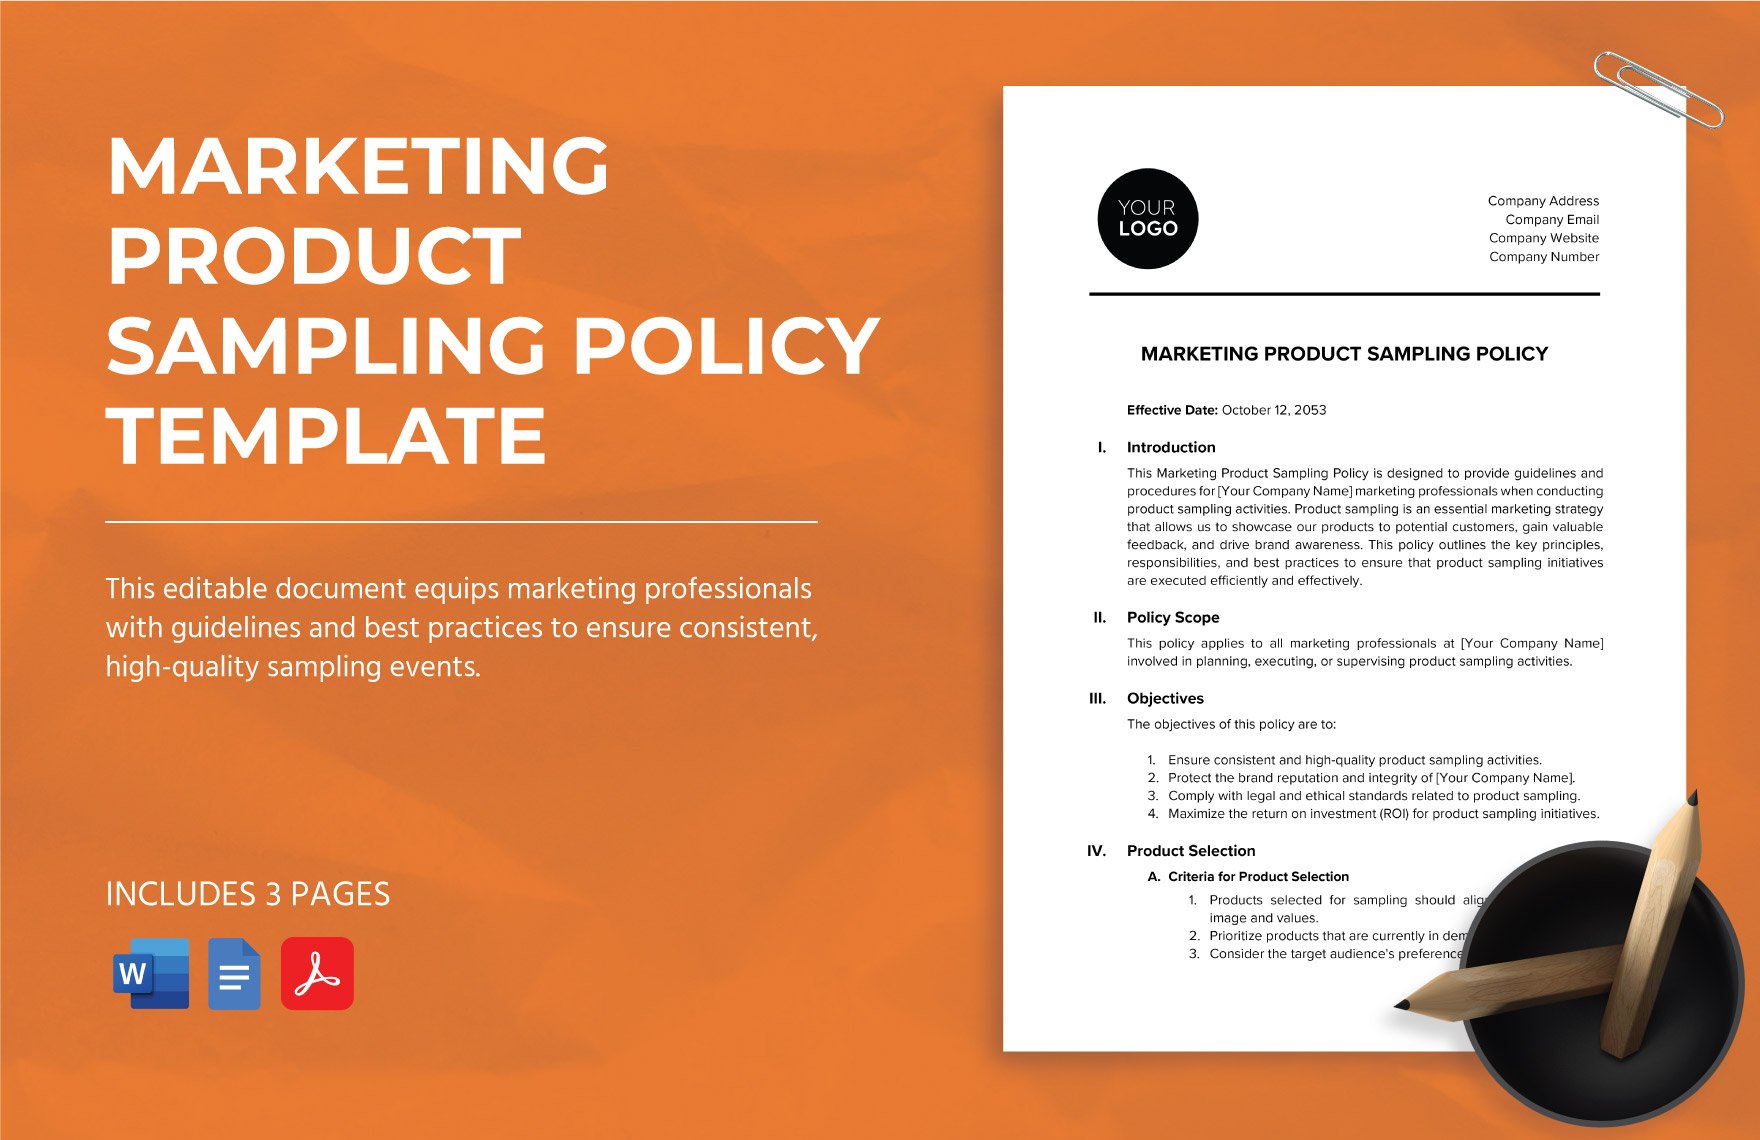 Marketing Product Sampling Policy Template in Word, Google Docs, PDF